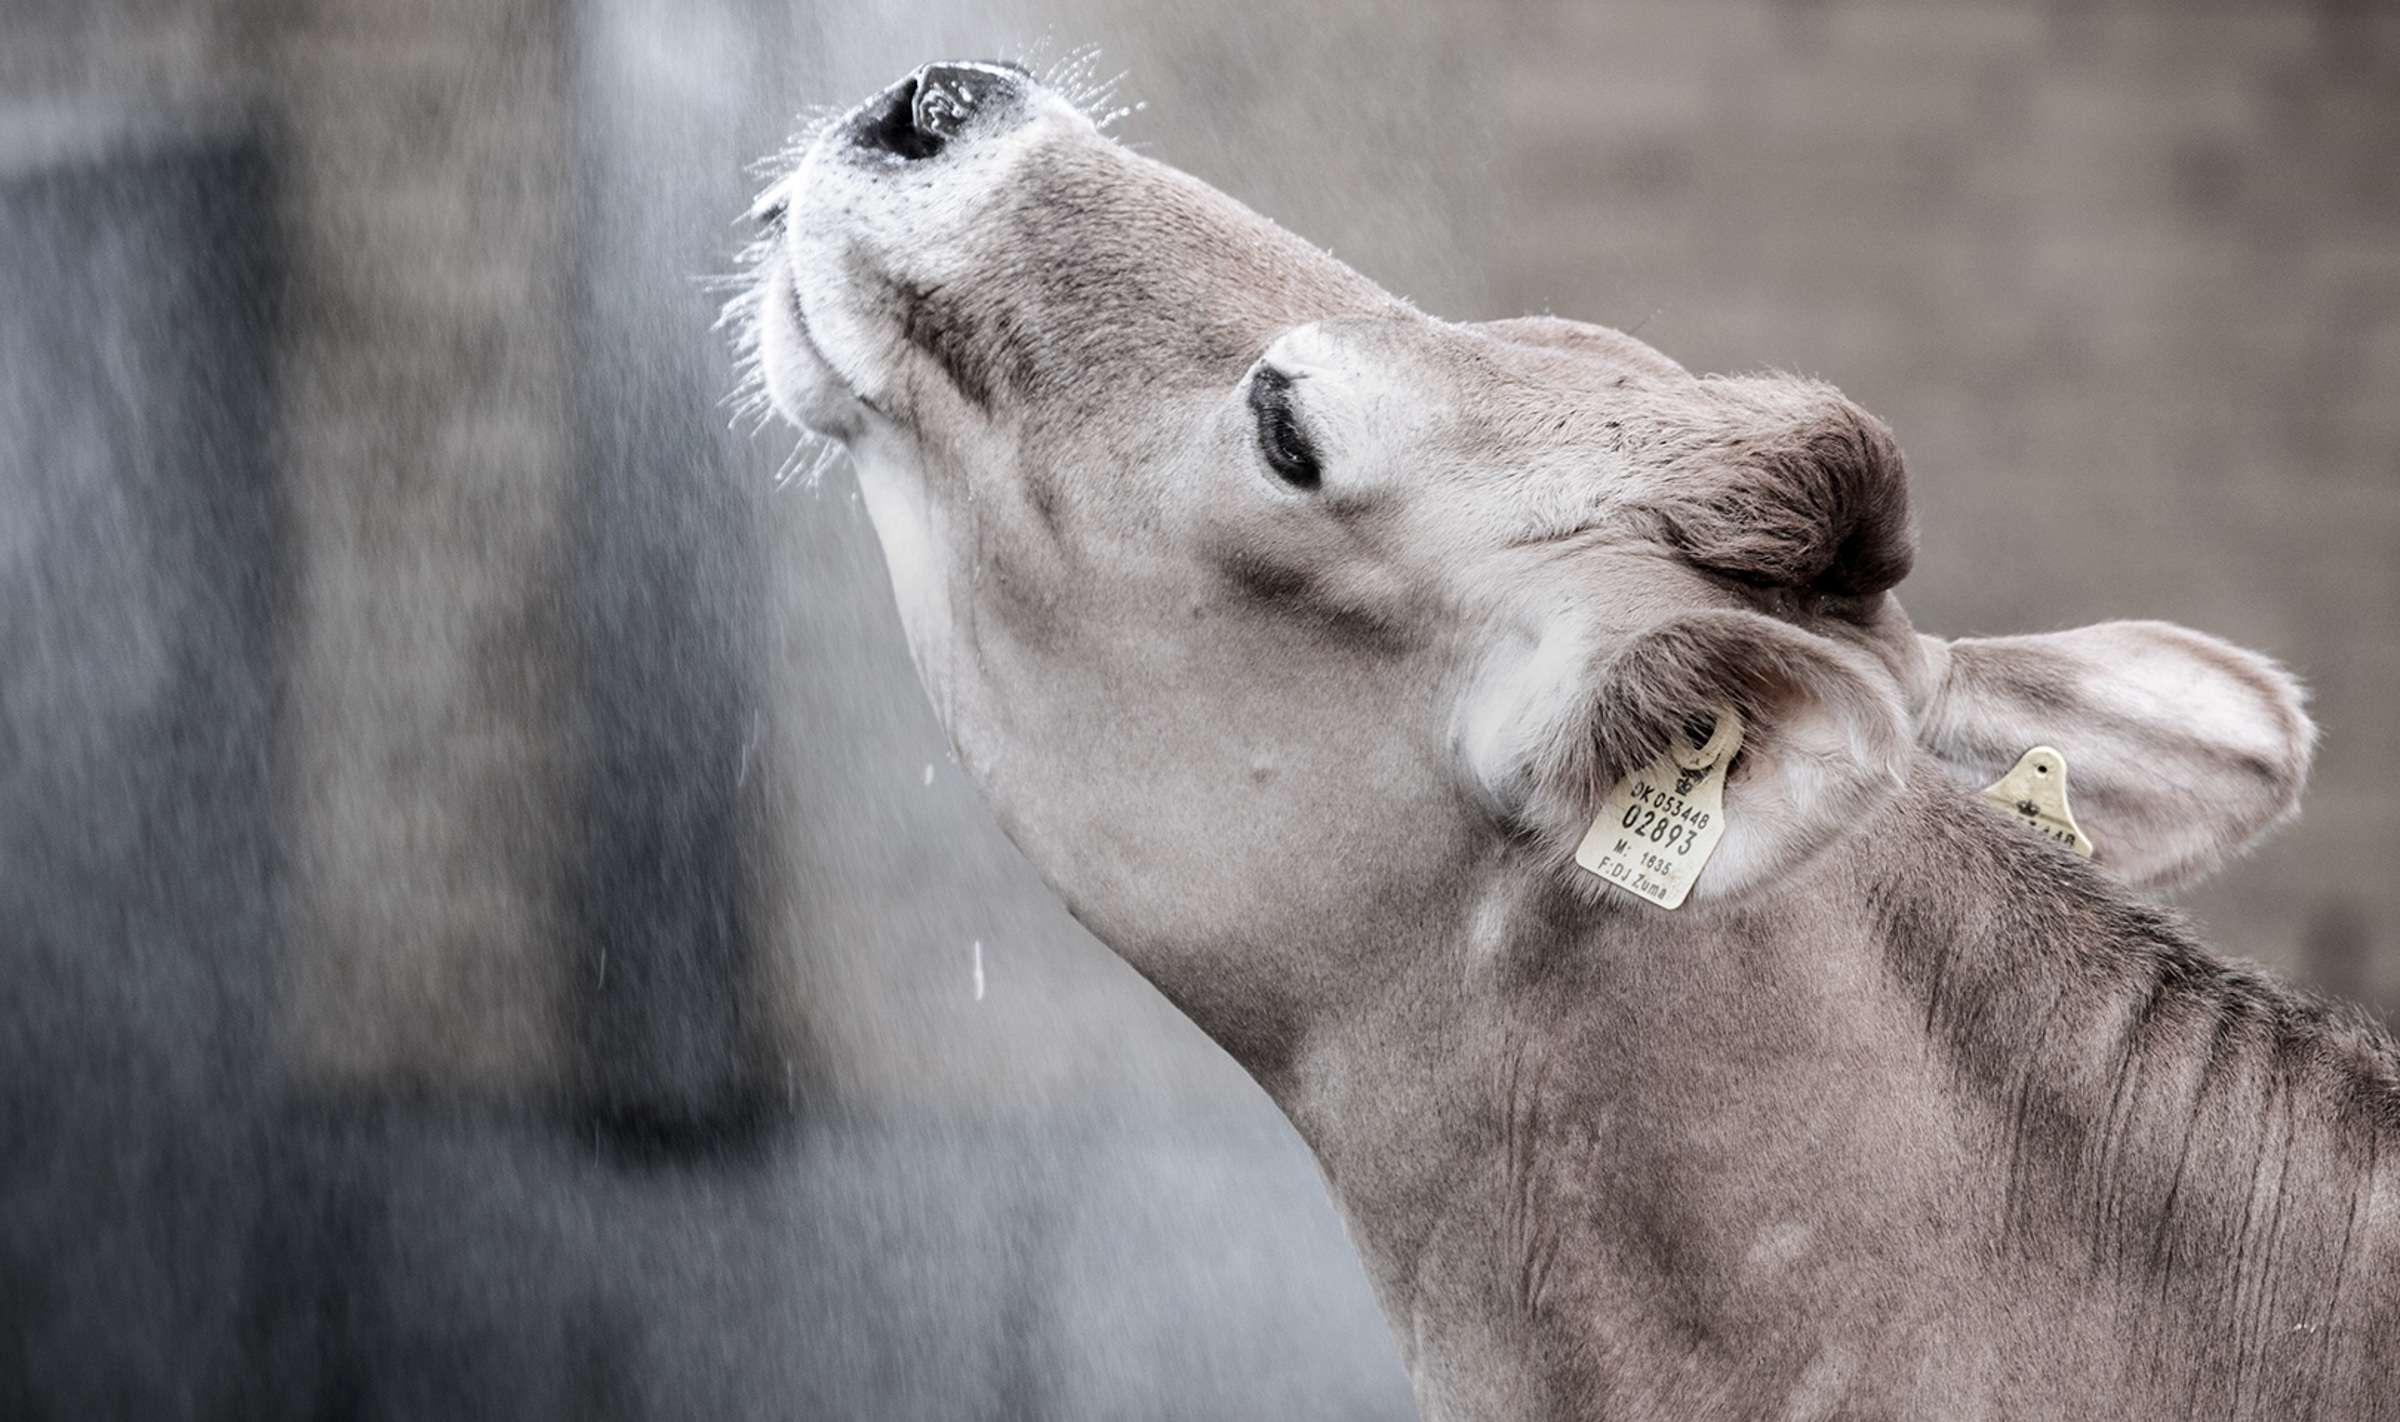 A cow being sprinkled with water